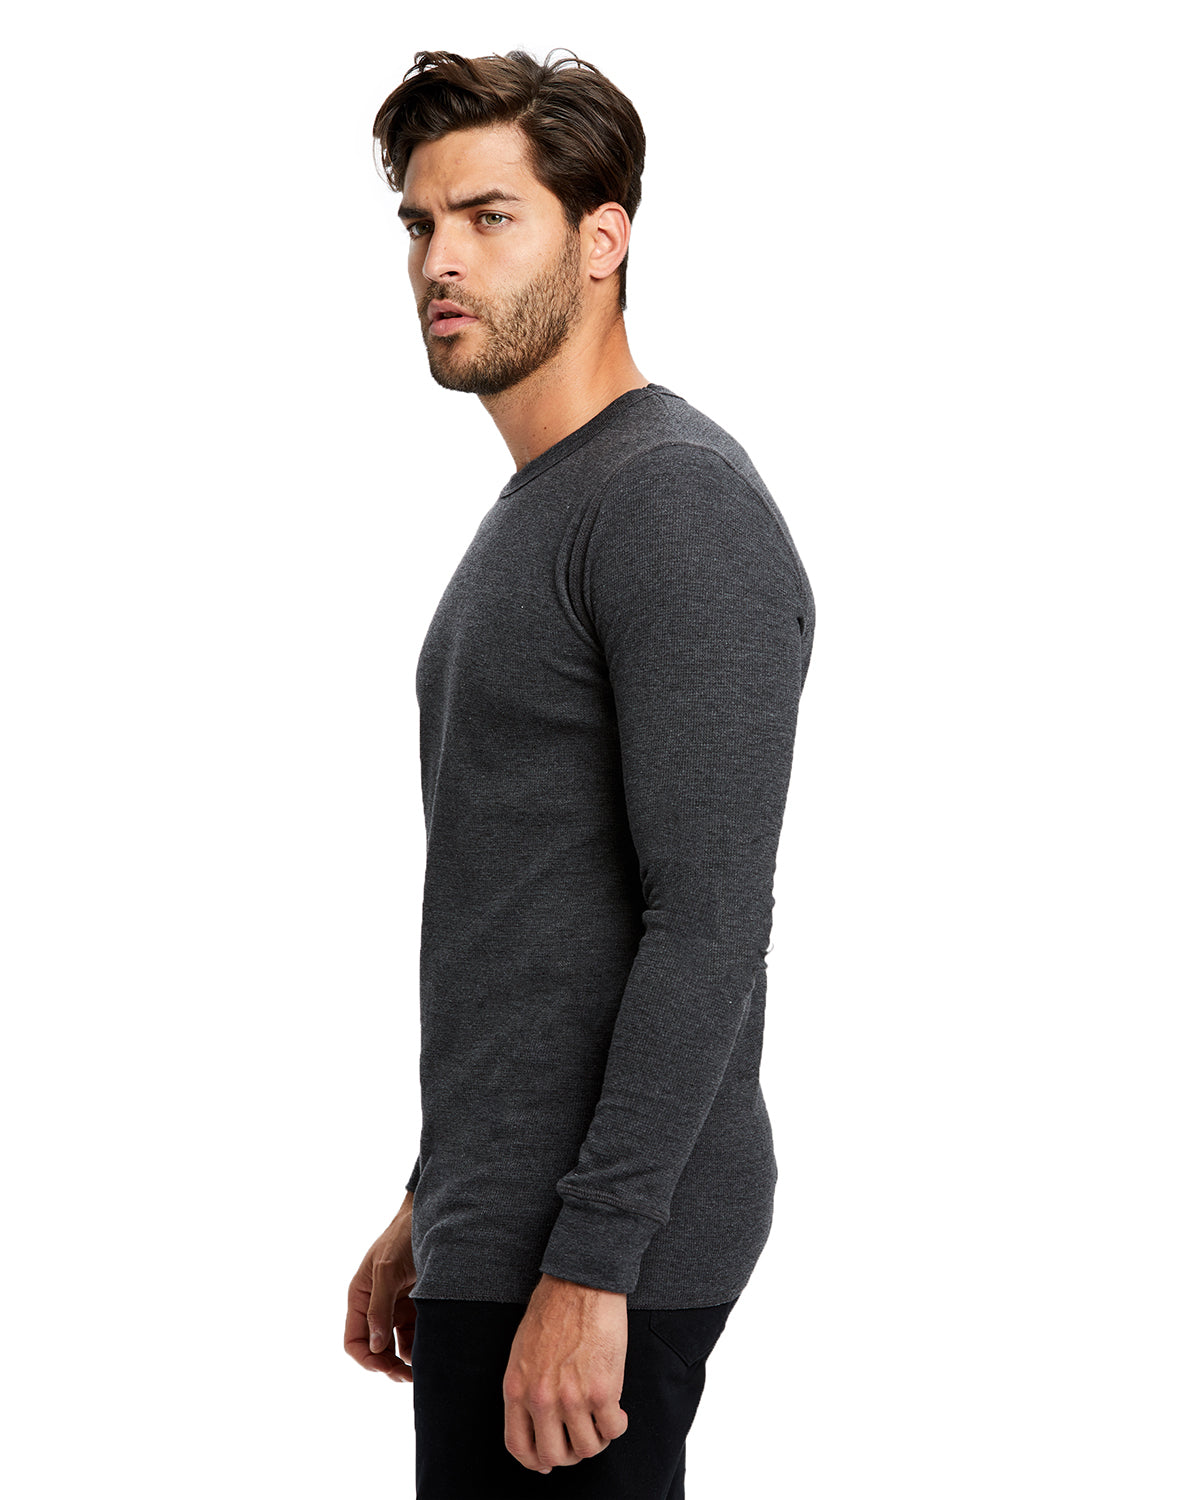 TX407GD - Long Sleeve Heavy Thermal Crew Neck